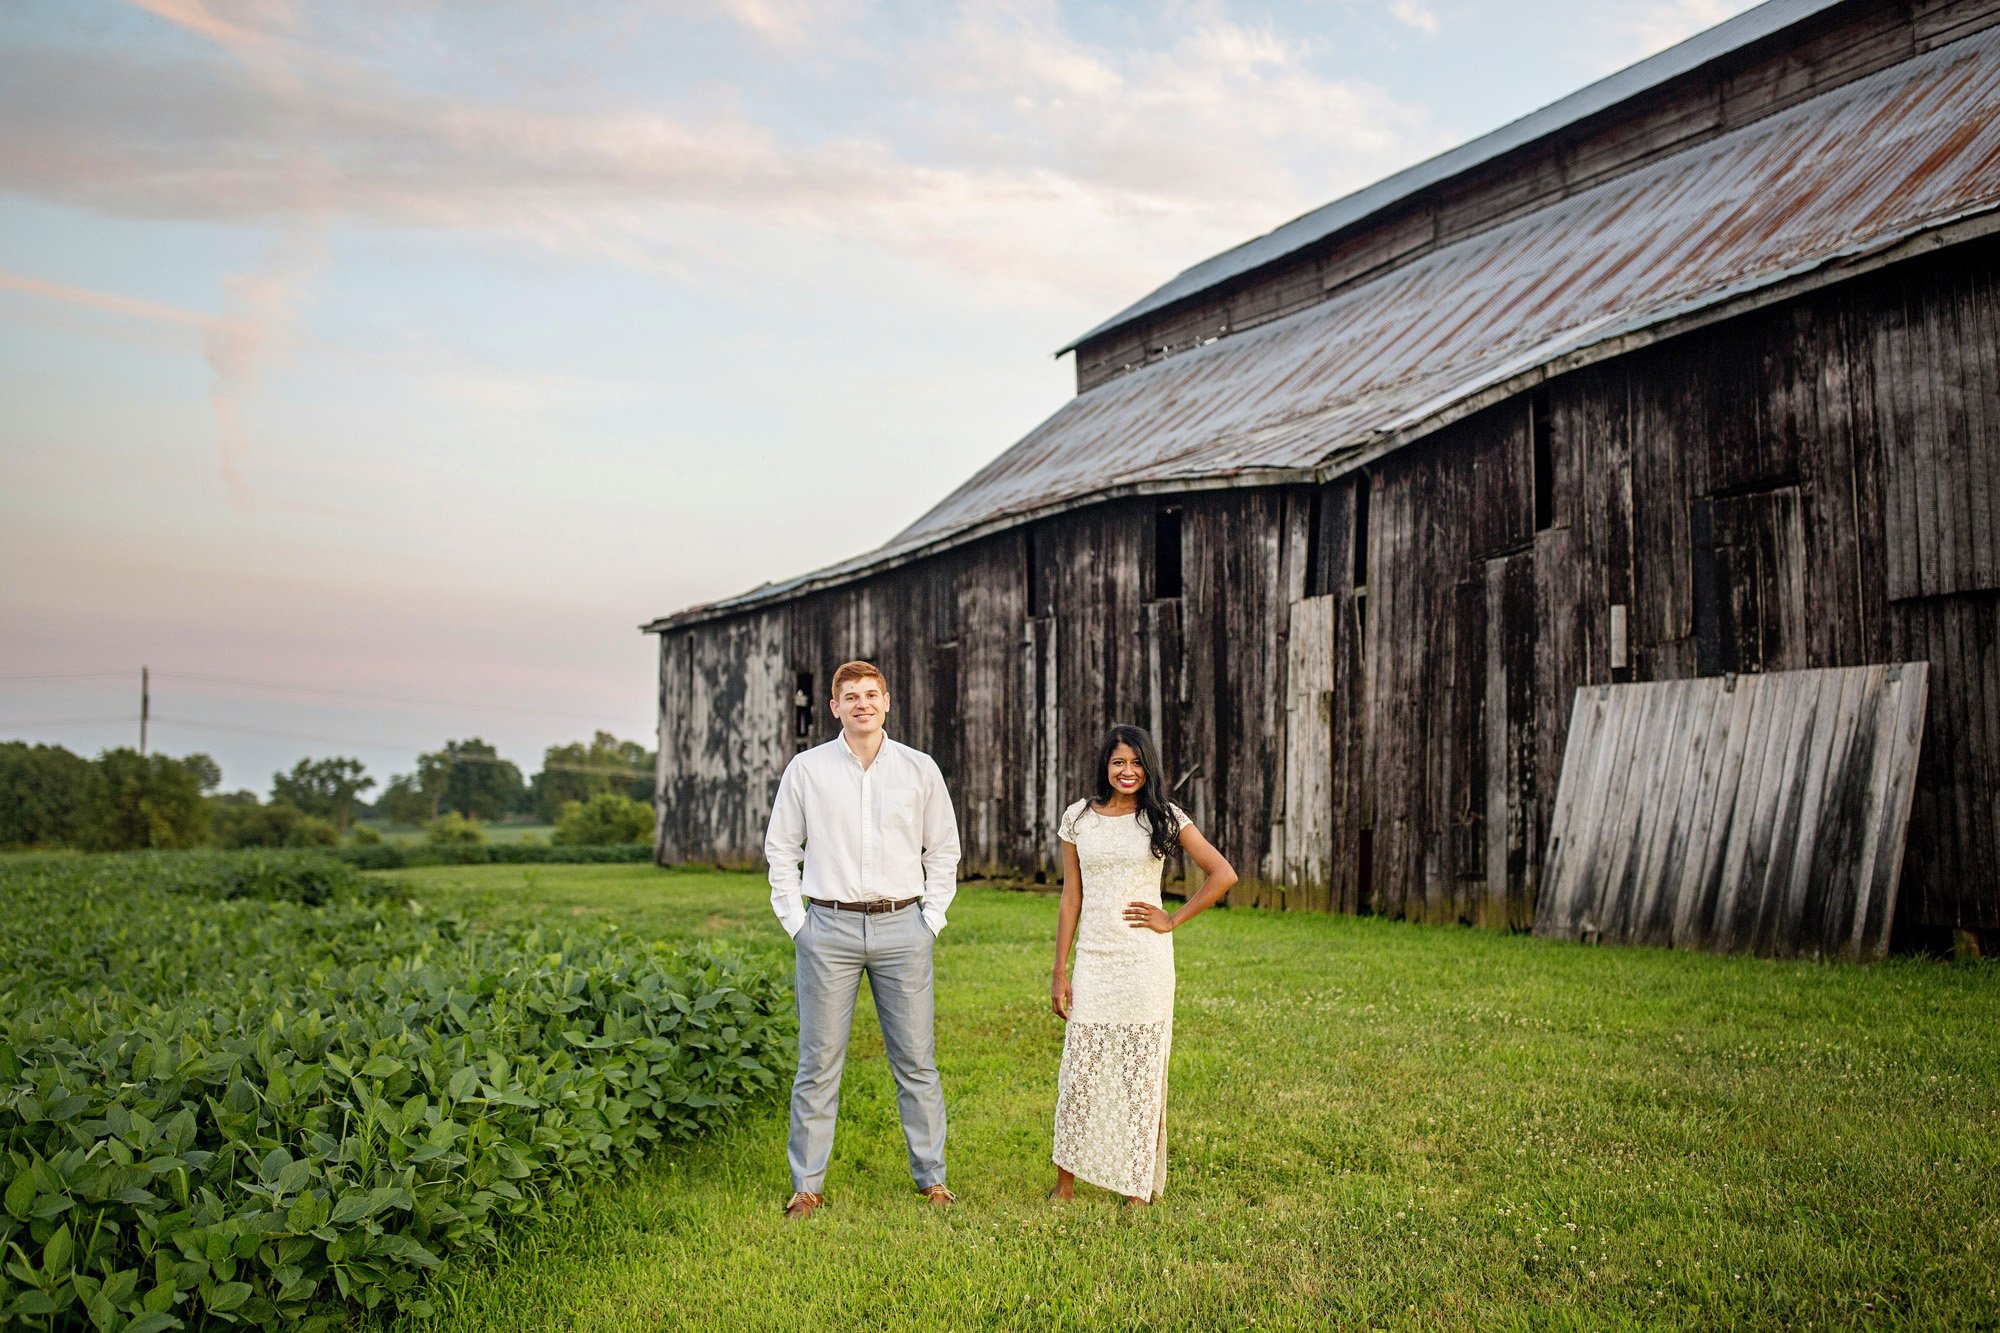 Seriously_Sabrina_Photography_Lexington_Midway_Kentucky_Engagement_Merefield_Sunflowers_Naz_and_Drew27.jpg